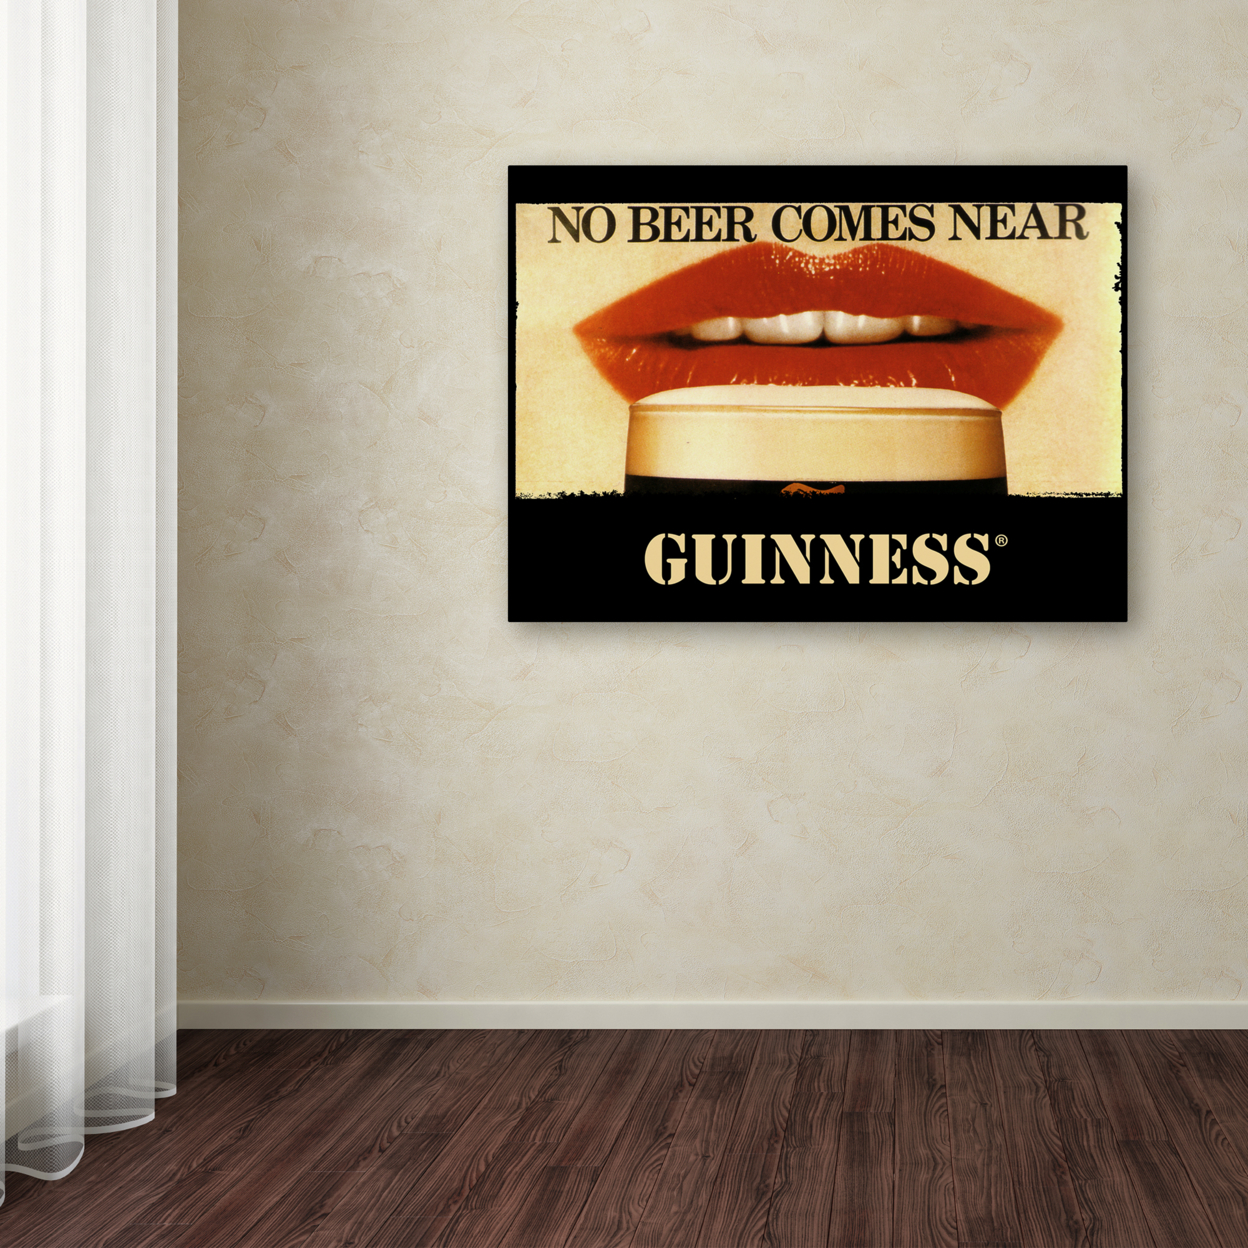 Guinness Brewery 'No Beer Comes Near' Canvas Art 18 X 24